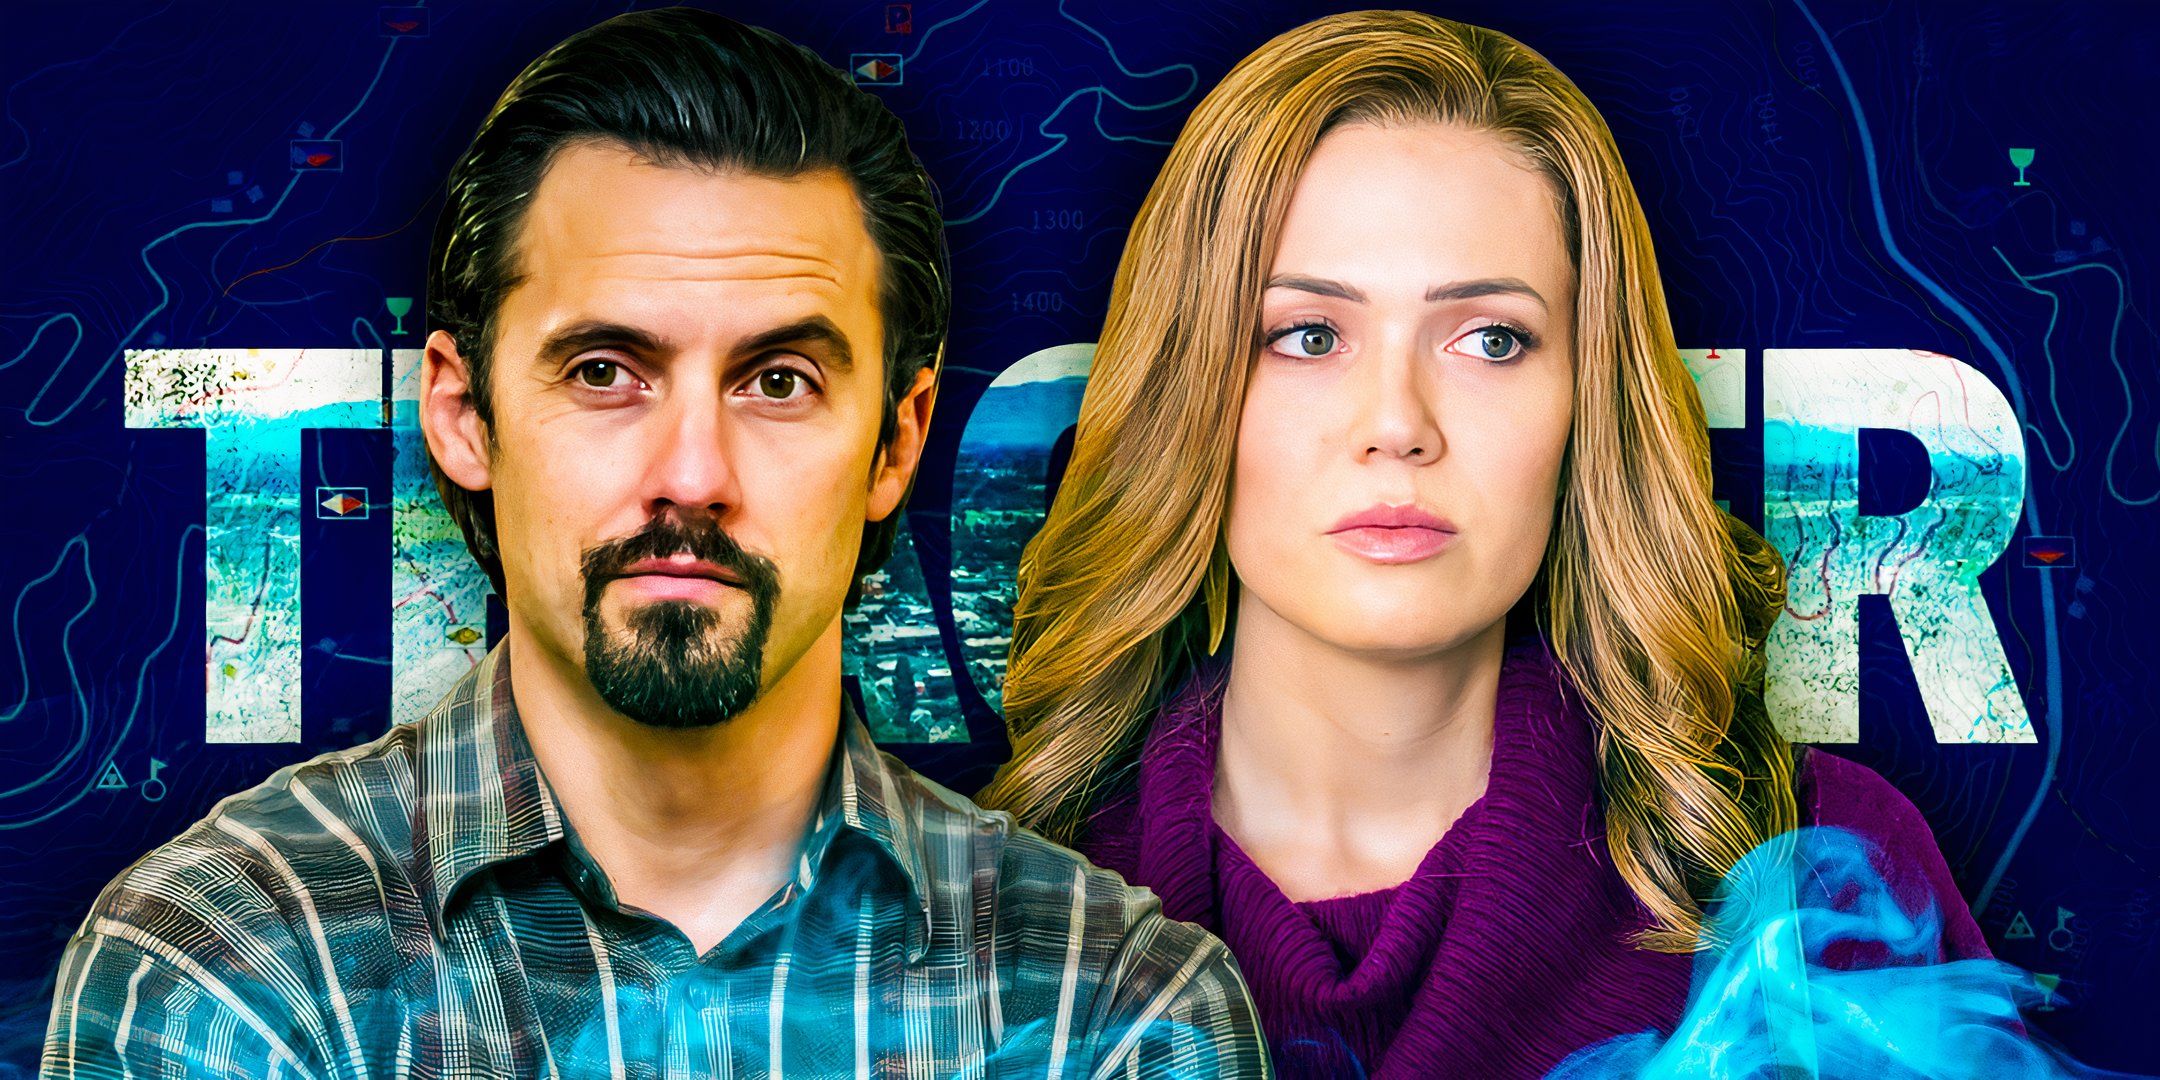 Custom image of Milo Ventimiglia and Mandy Moore in front of the Tracker TV series title.